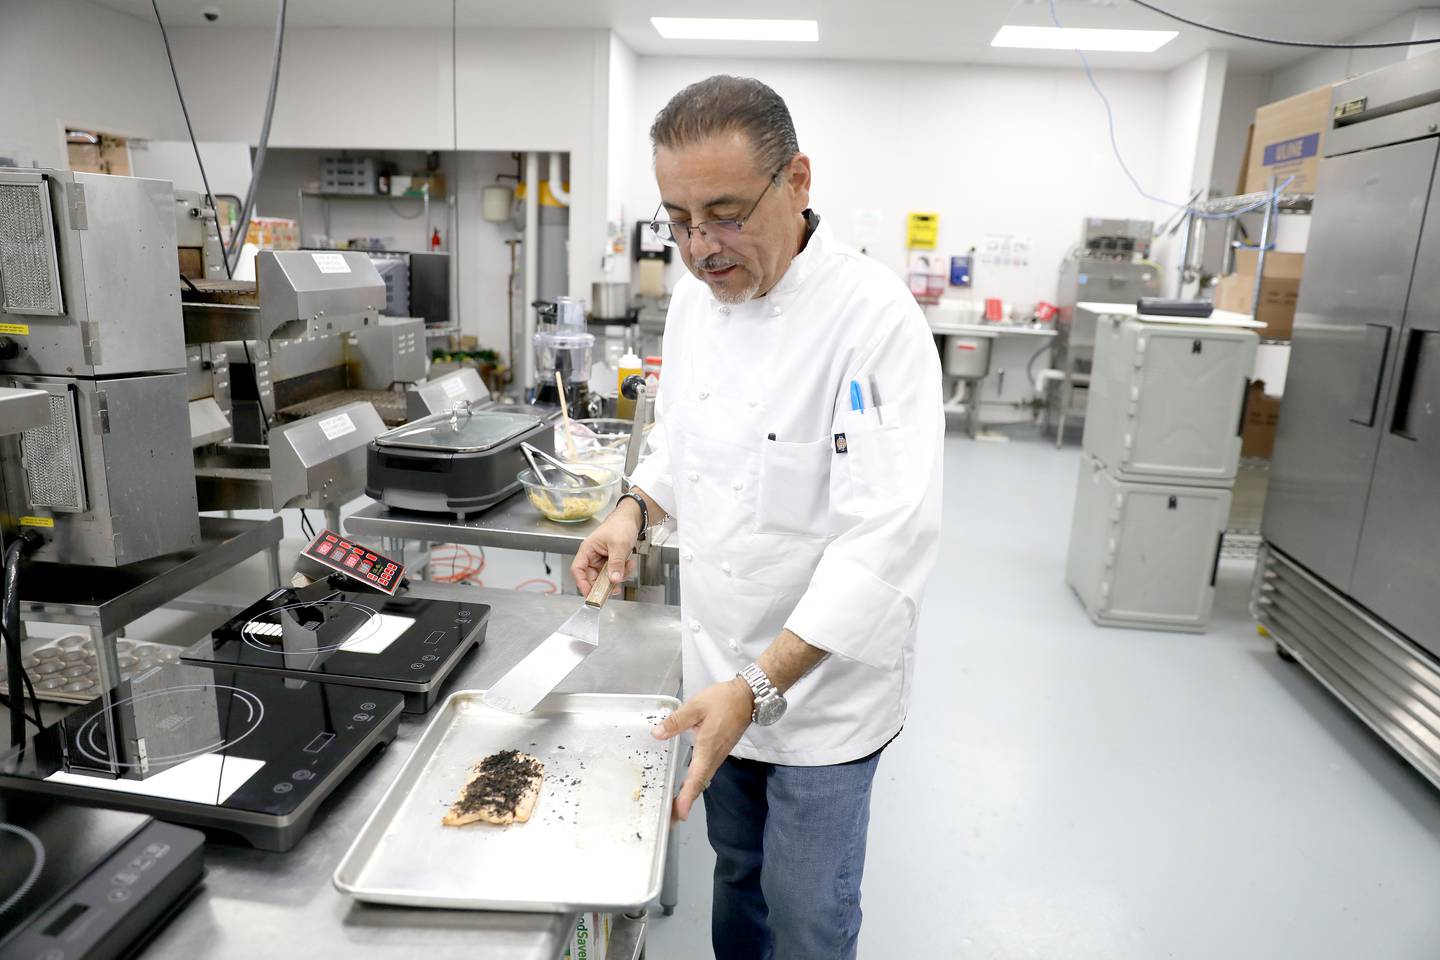 Mario Arevalo, director of operations, works in the kitchen of Keto Factory, formerly AJ Sliders, which had opened in September 2020 at 2075 Prairie St., Suite 110 in St. Charles. Keto Factory specializes in food that is wheat-free, gluten-free, sugar-free and soy-free and offers grab and go meals as well as market products and meal plans.